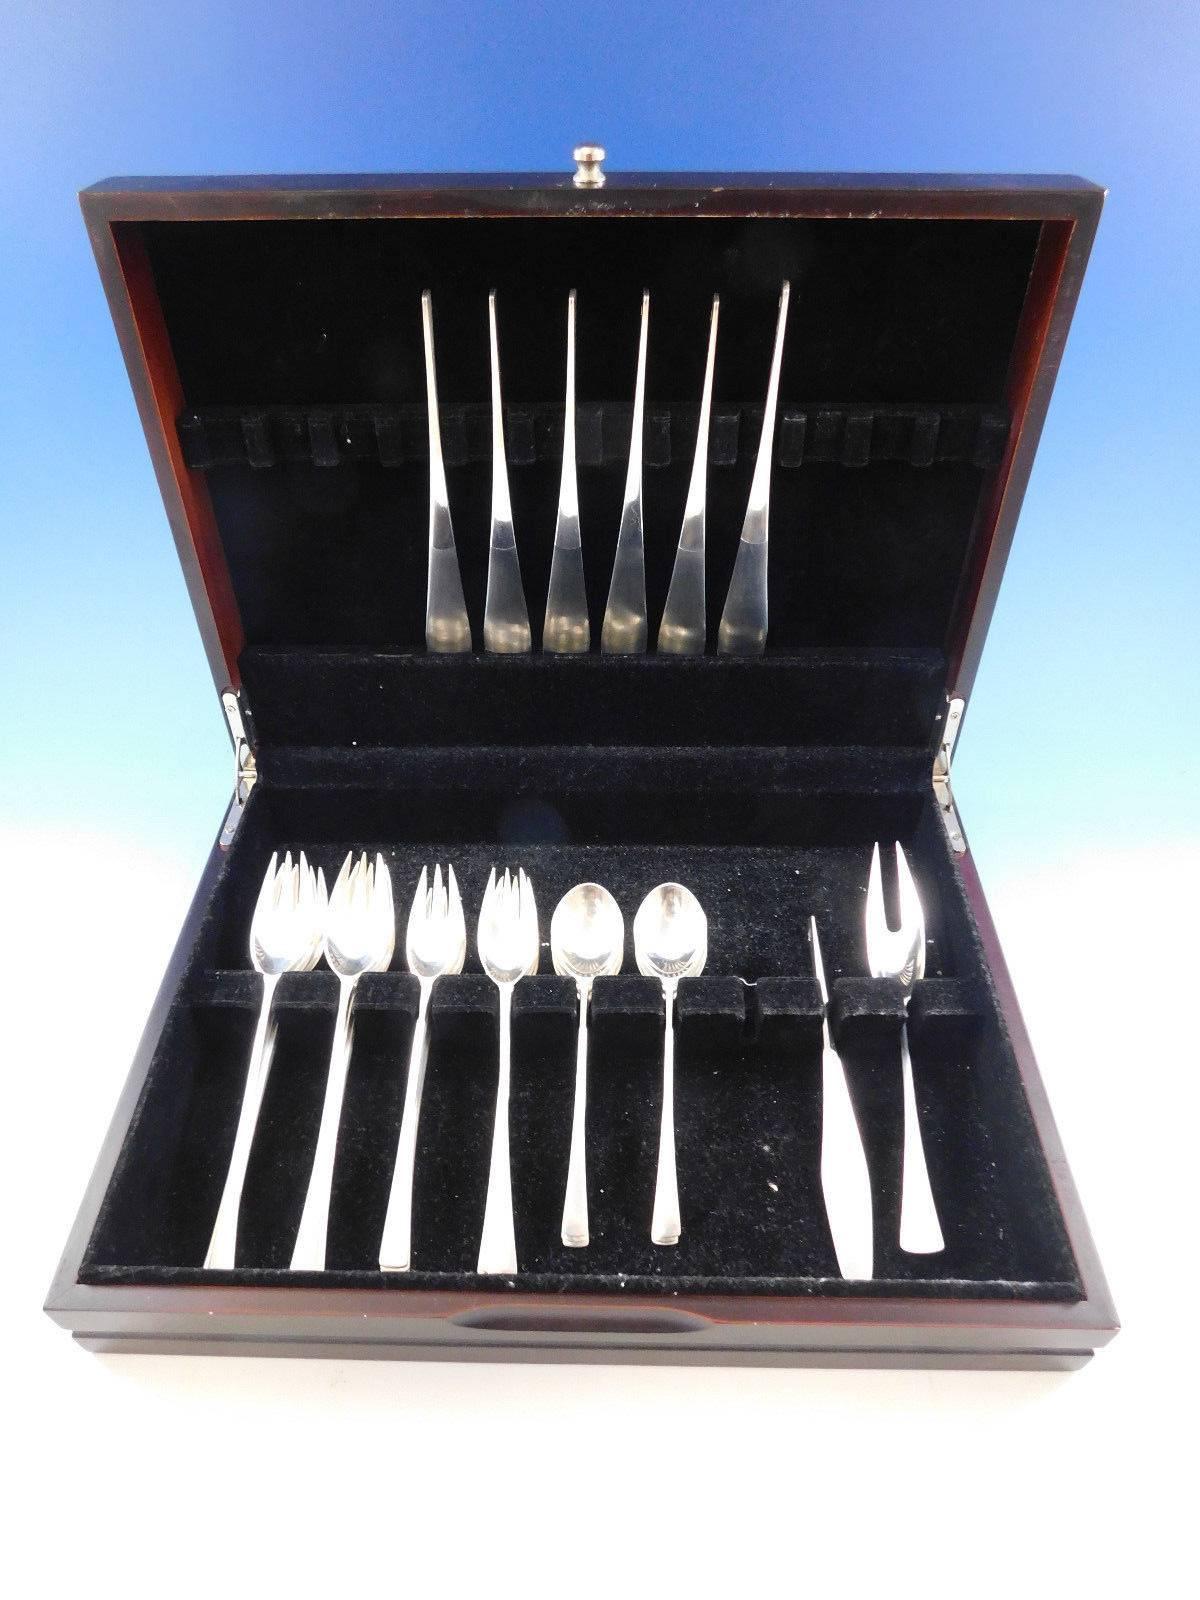 Fabulous Scandinavian Modern Tjorn by Dansk sterling silver flatware set of 26 pieces. This set has solid handle knives with innovative stainless blades that are nearly seamlessly where the blade meets the handle. 

This set includes: Six dinner